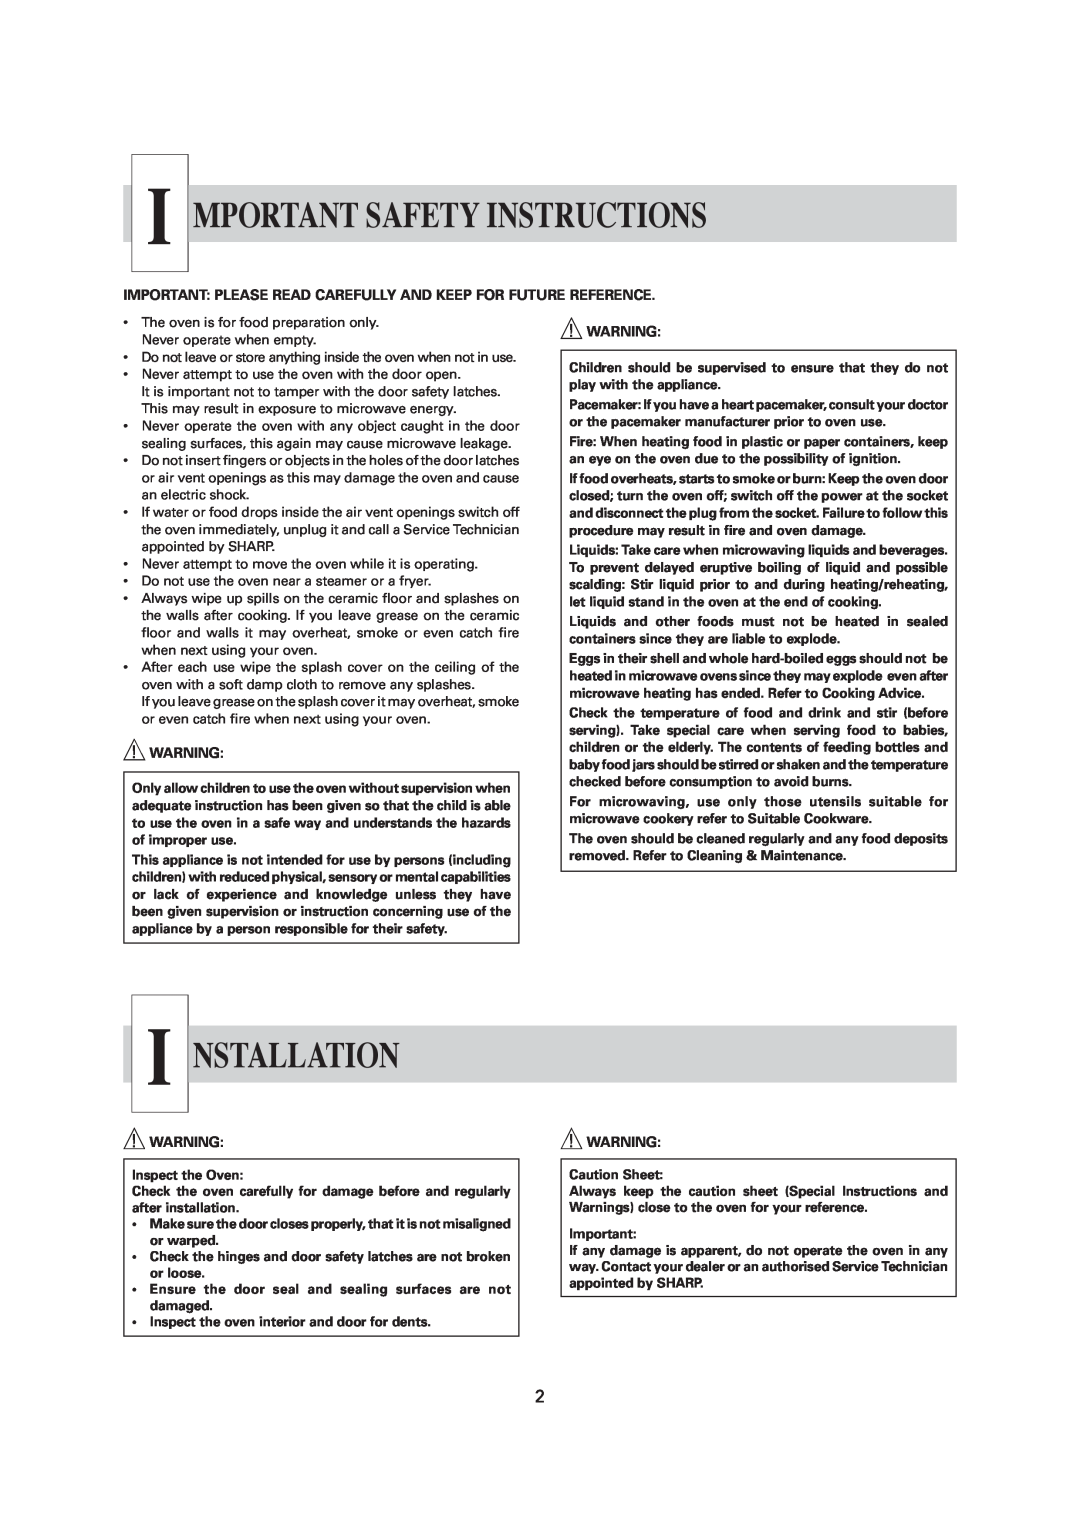 Sharp R-1900M operation manual Mportant Safety Instructions, I Nstallation 